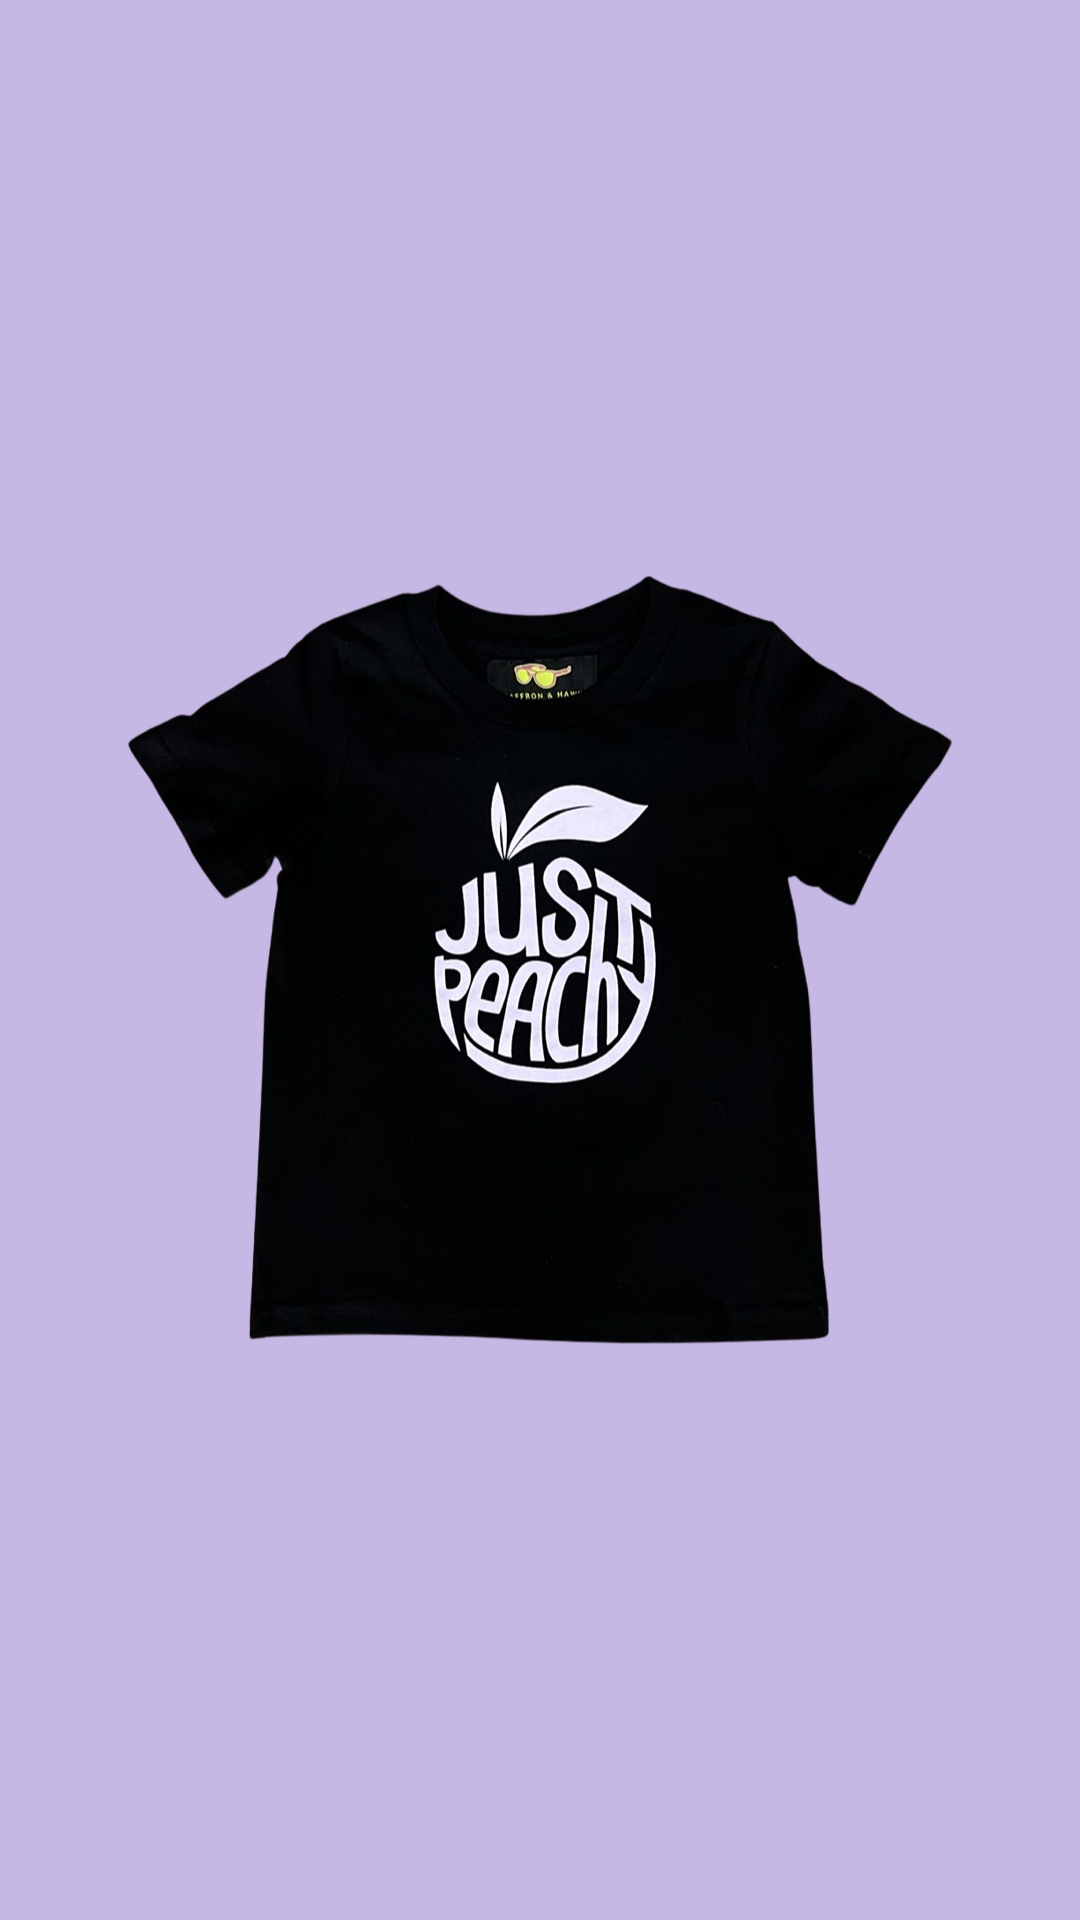 Just Peachy Kids T-Shirt- Black with Purple